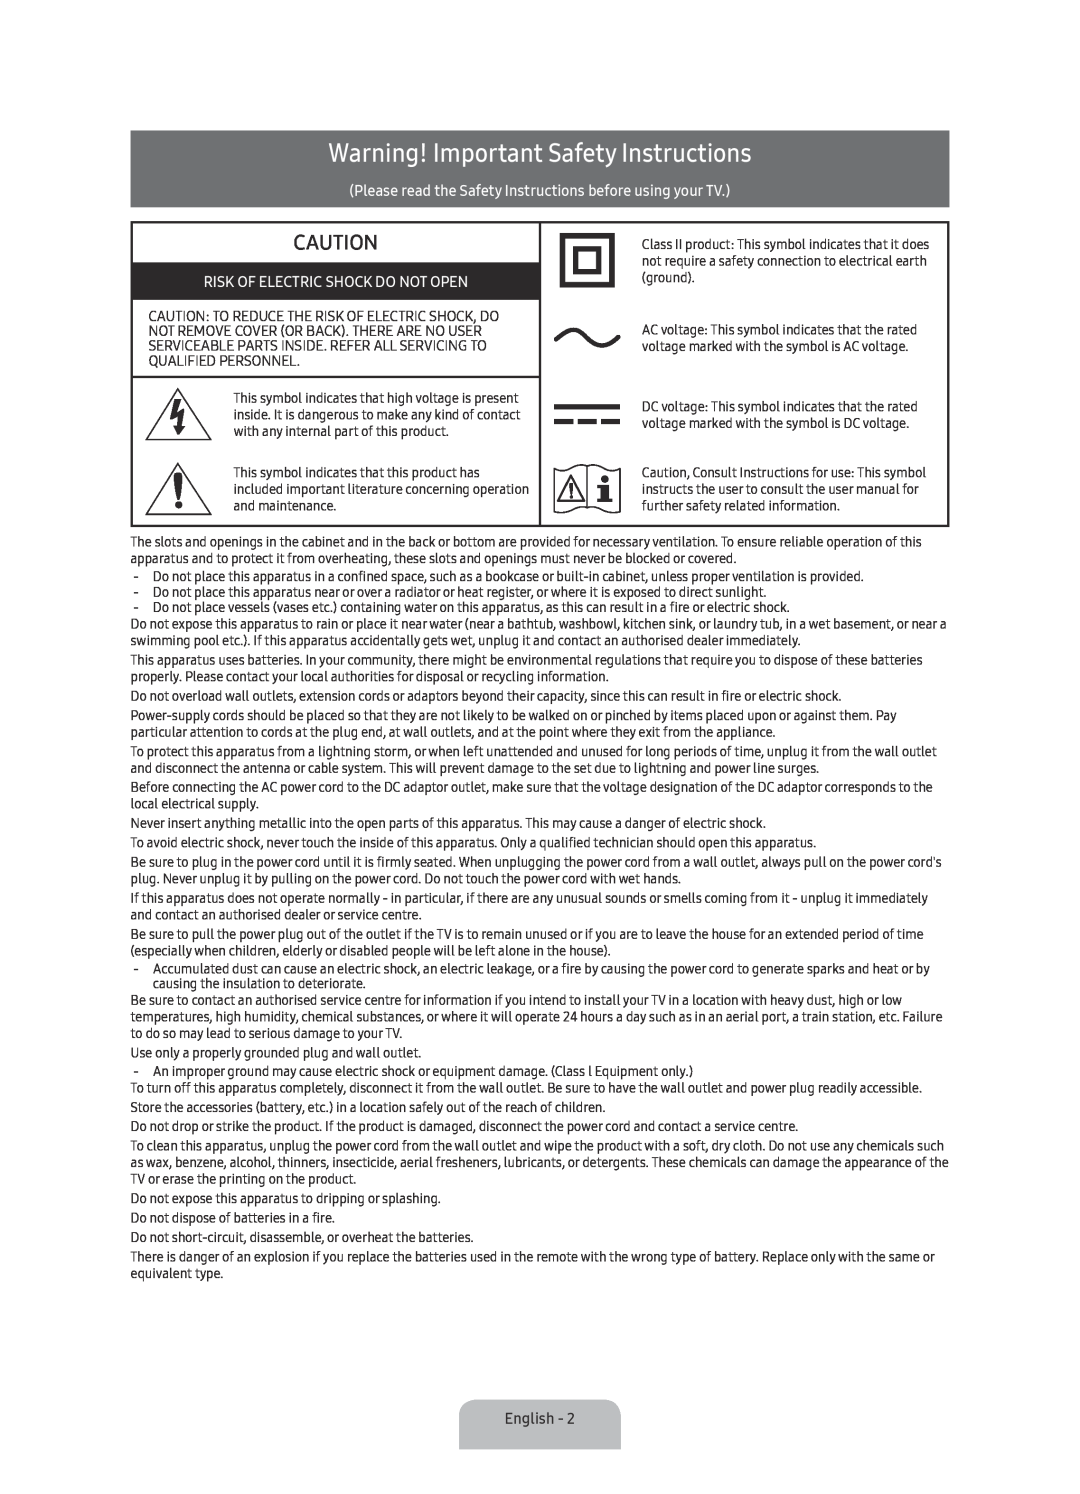 Samsung UA55KS9000KXXV manual Please read the Safety Instructions before using your TV, Risk Of Electric Shock Do Not Open 